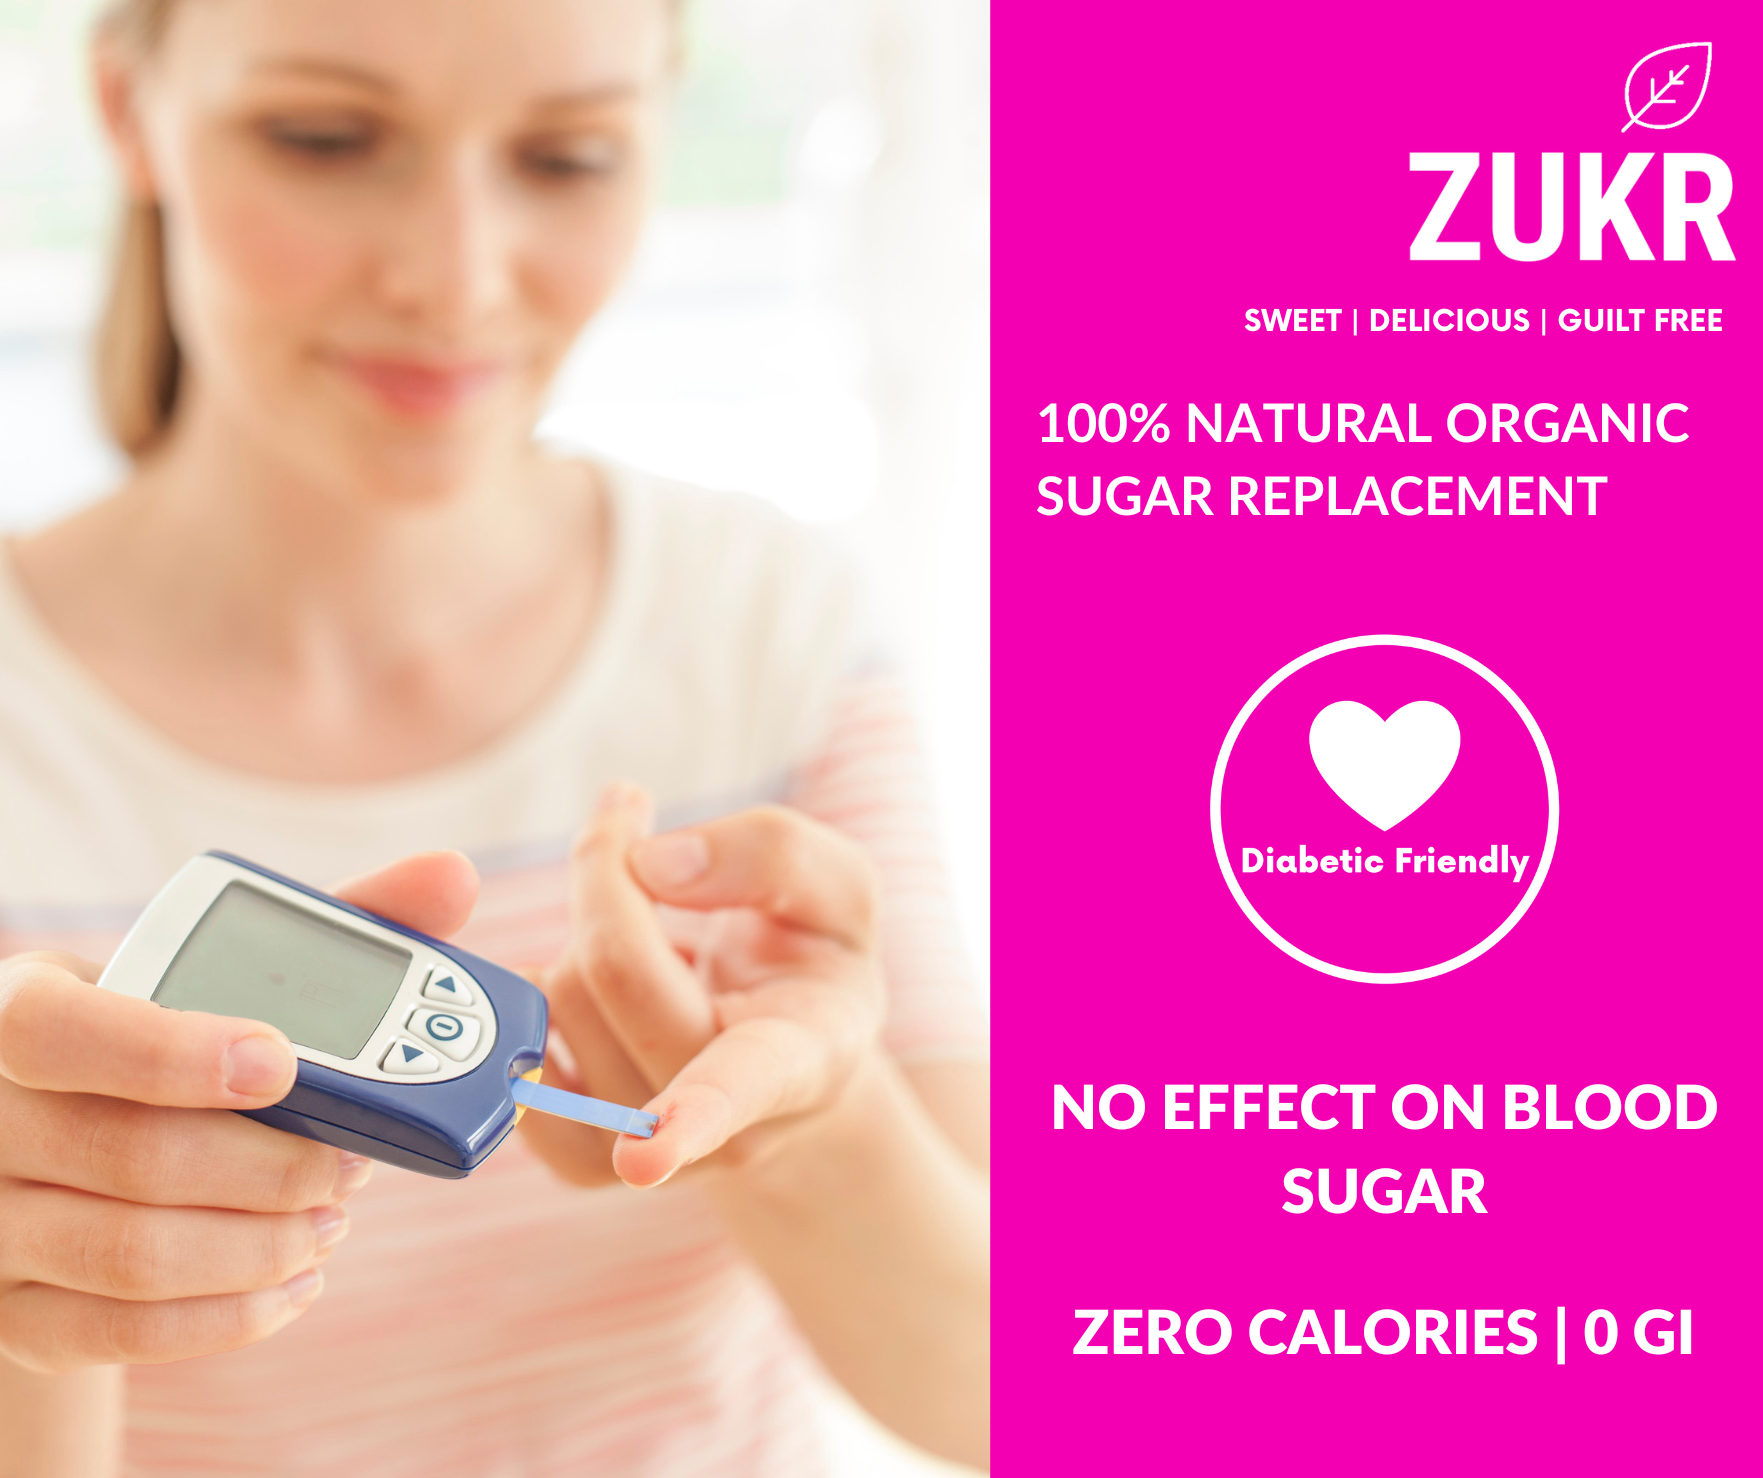 Zero GI: Maintains stable blood sugar levels and promotes overall health. Can be used by those who are monitoring blood sugar levels